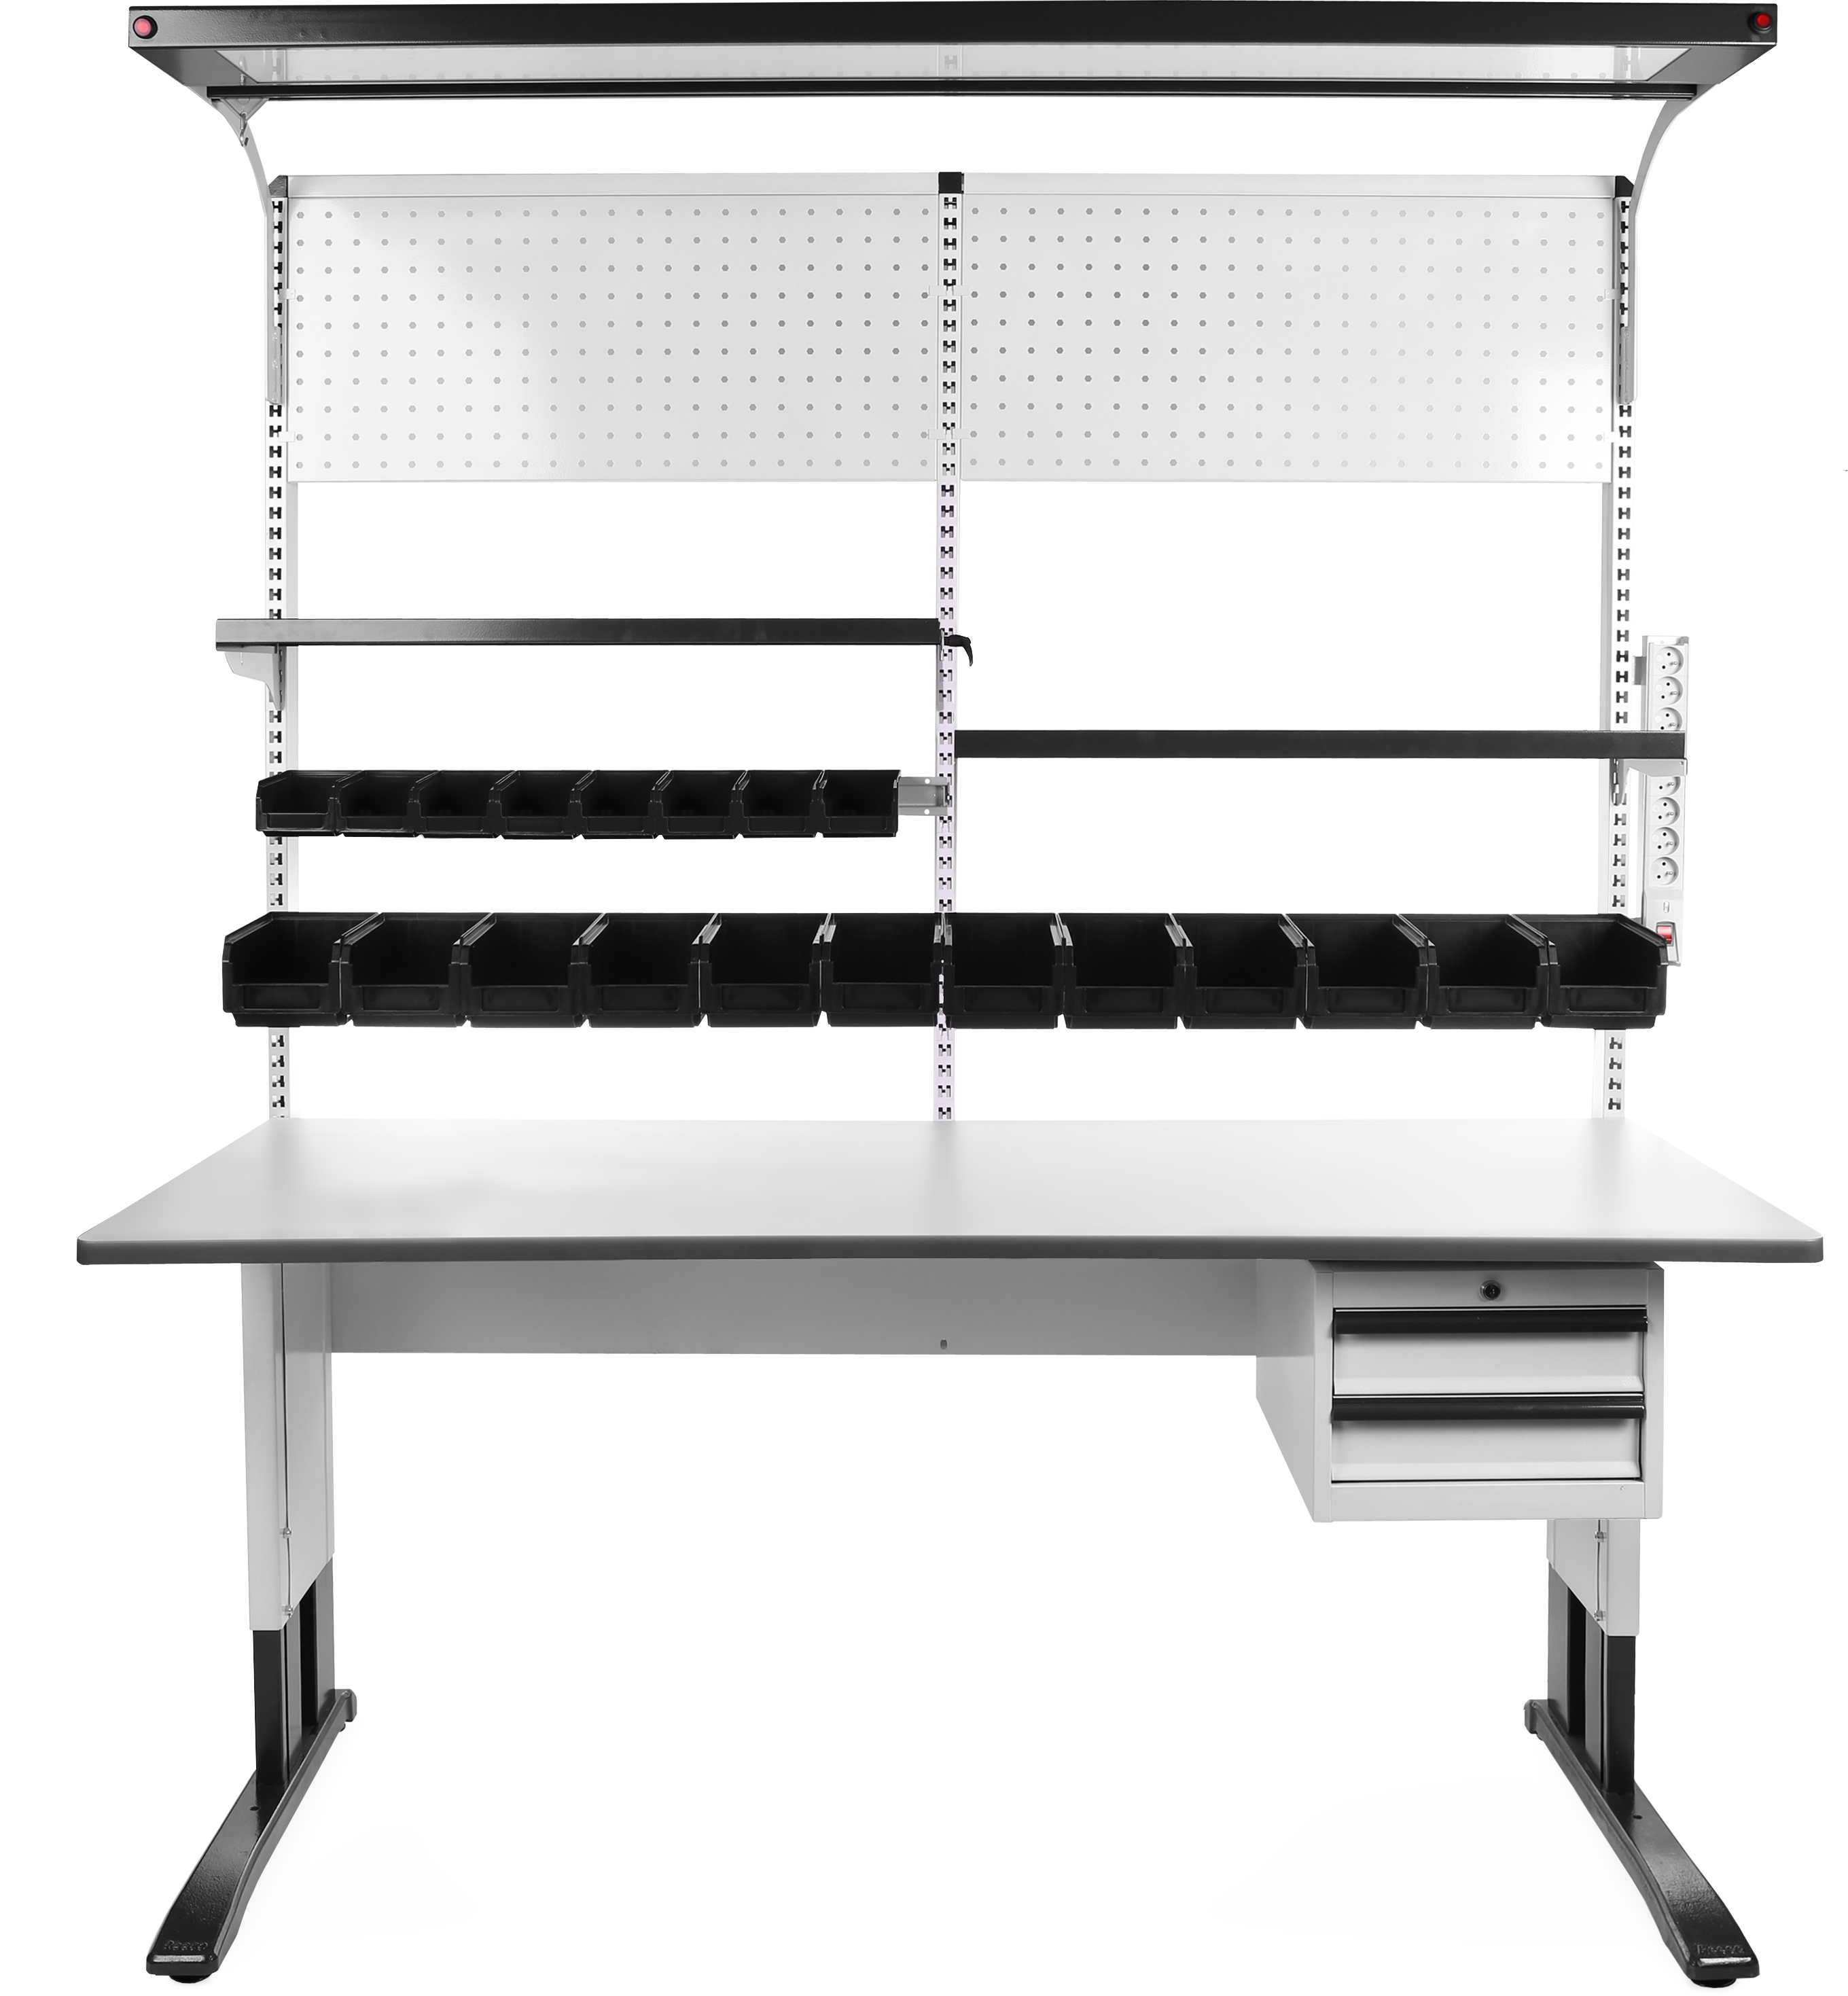 ESD-Workstation-Premium-Melamine-Table-Top-Reeco-Robert-1830-x-750-mm-ESD-Products-AES